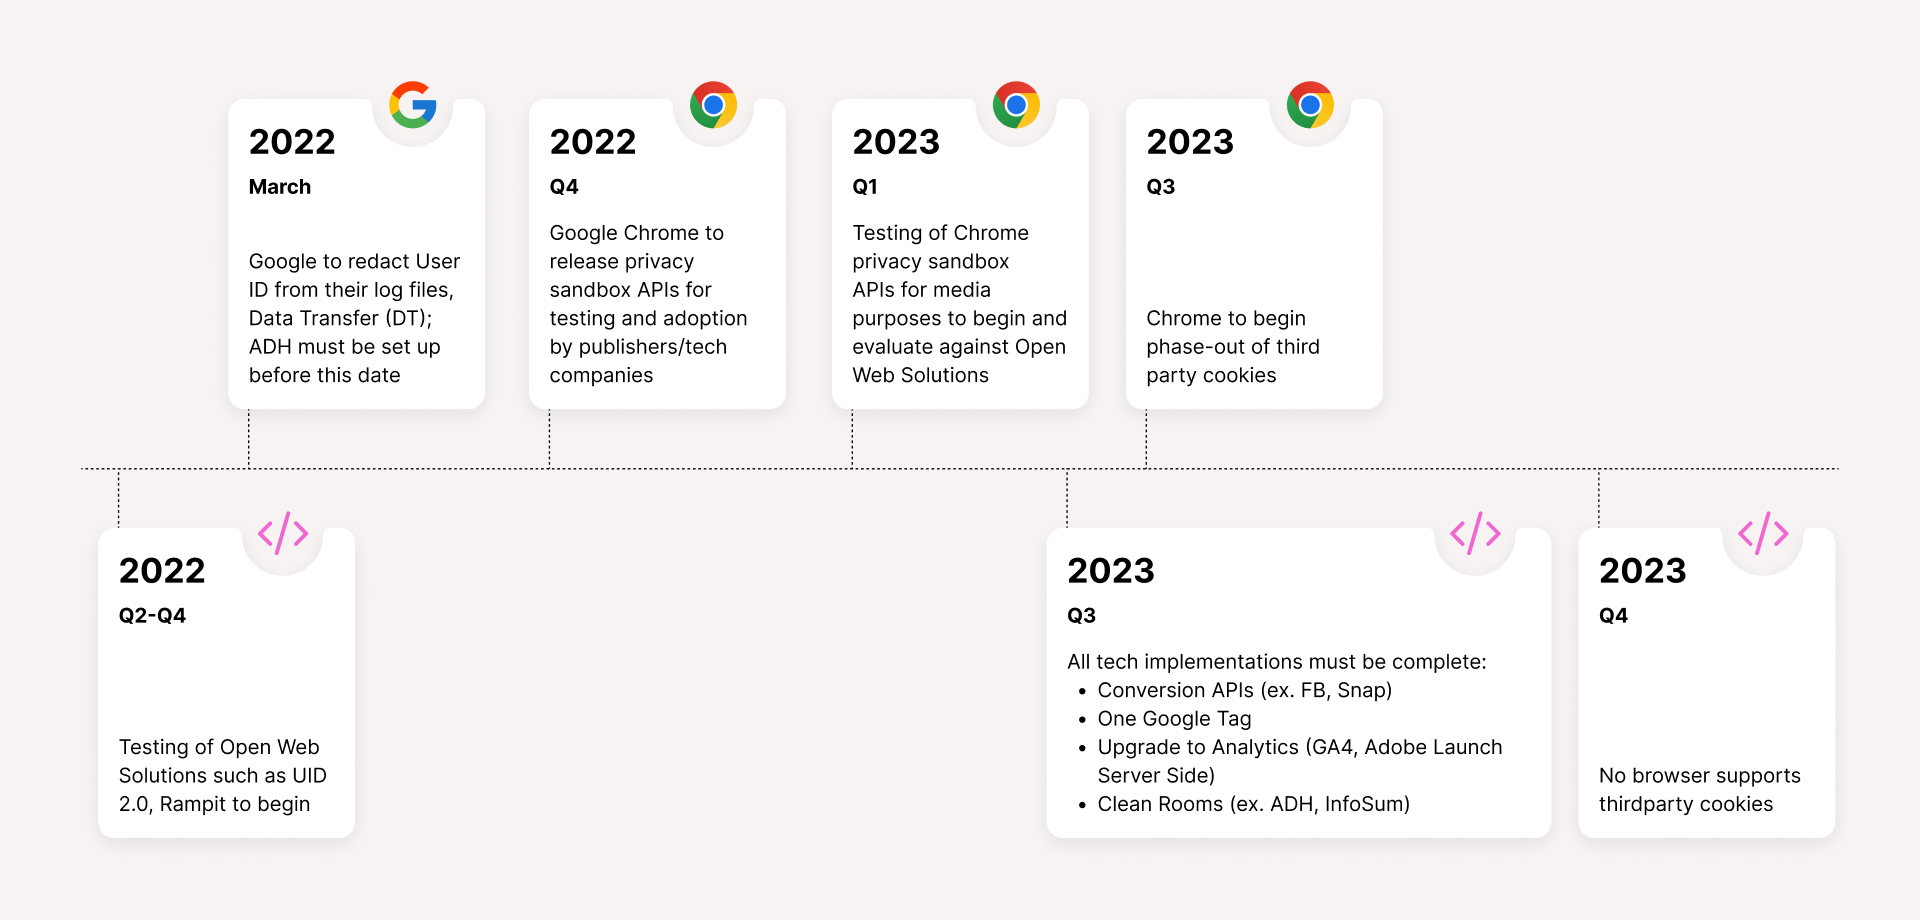 Matterkind's timeline of Google & Apple announcements/releases (2022-2023)